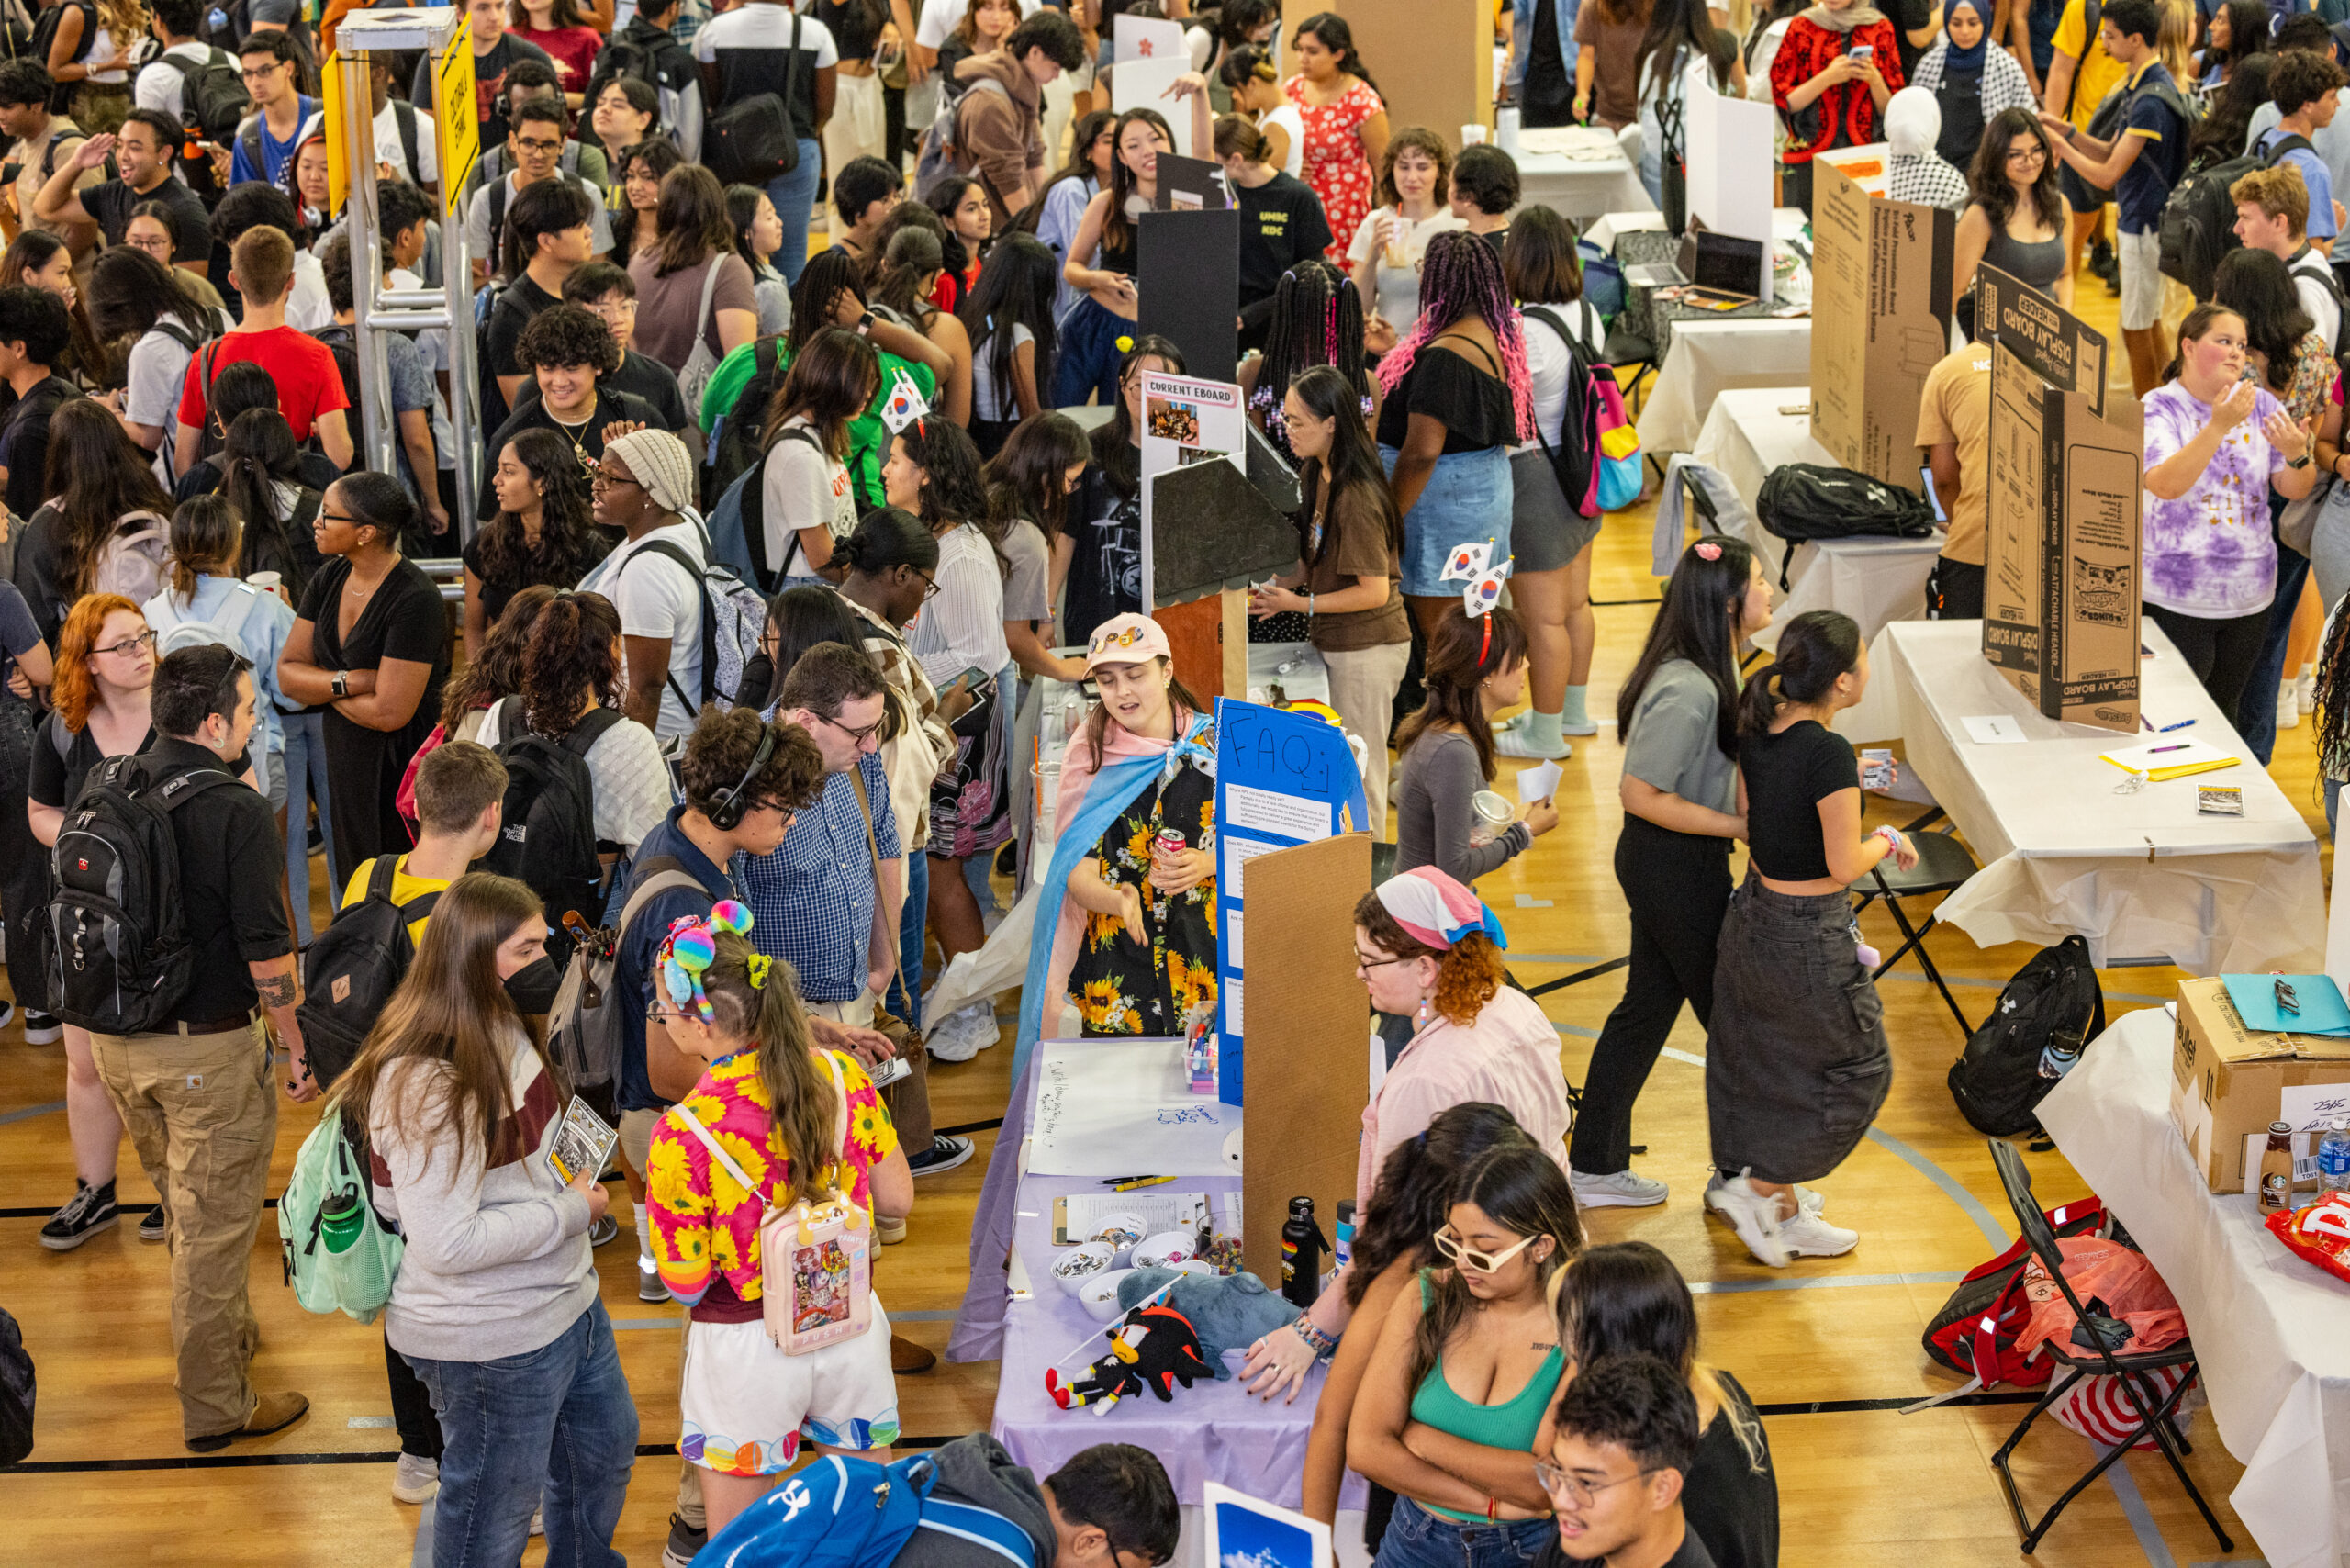 Need a fun activity? UMBC iFest delivers with 200+ student organizations and tons to explore 